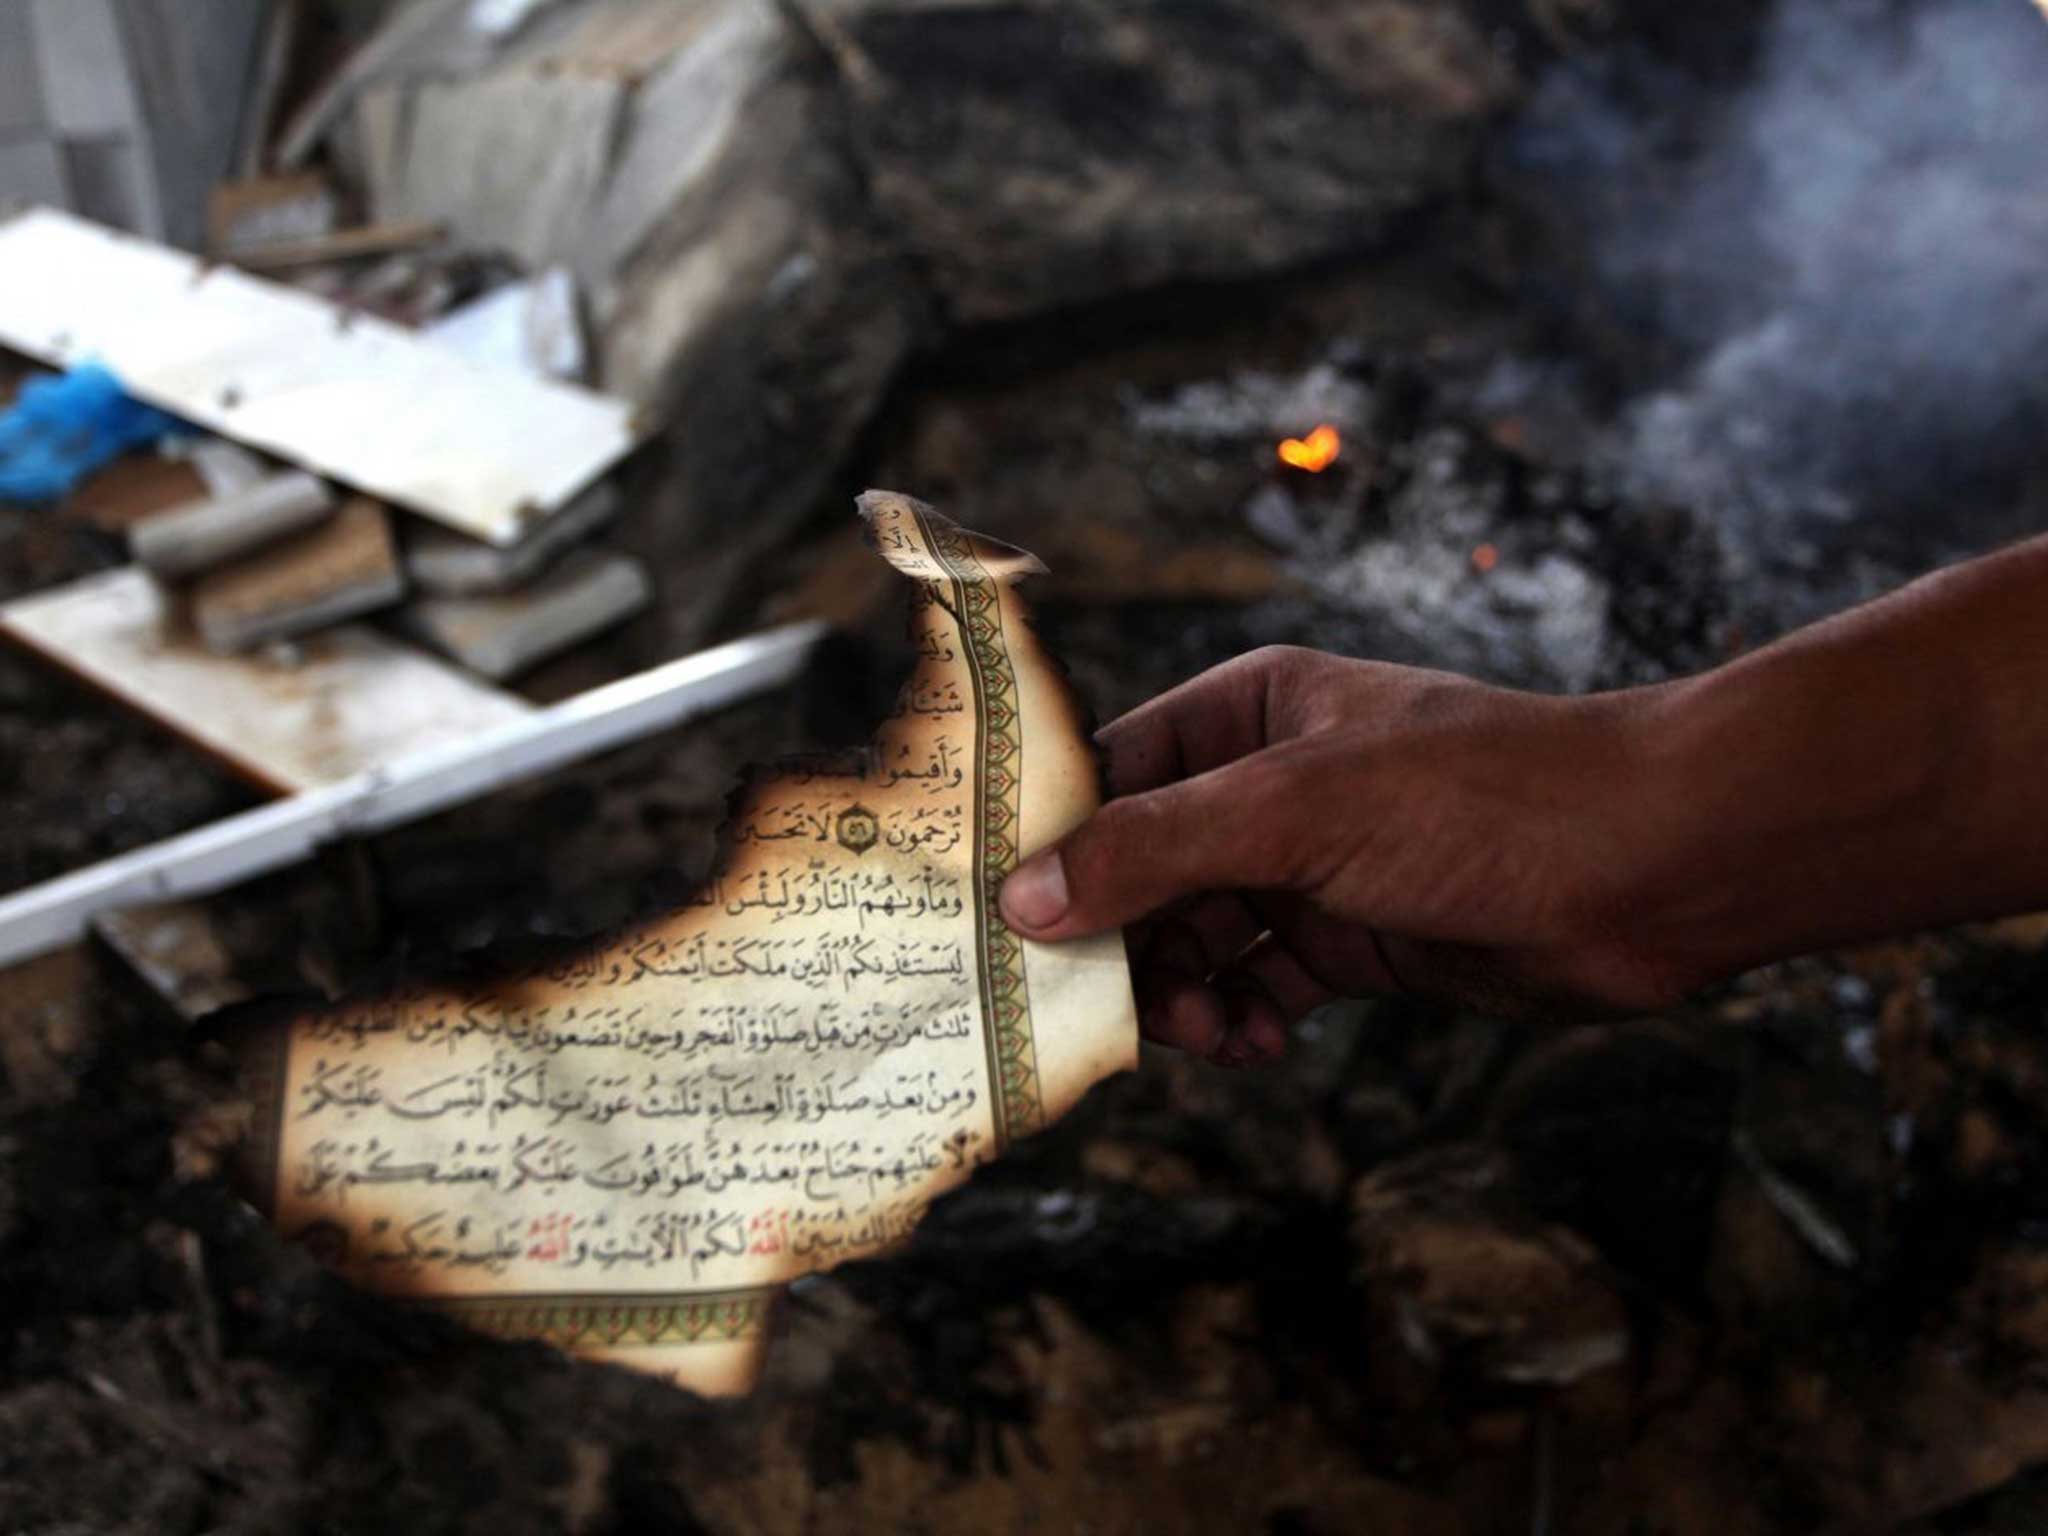 A man holds the remains of a Koran after another mosque was bombed in Gaza